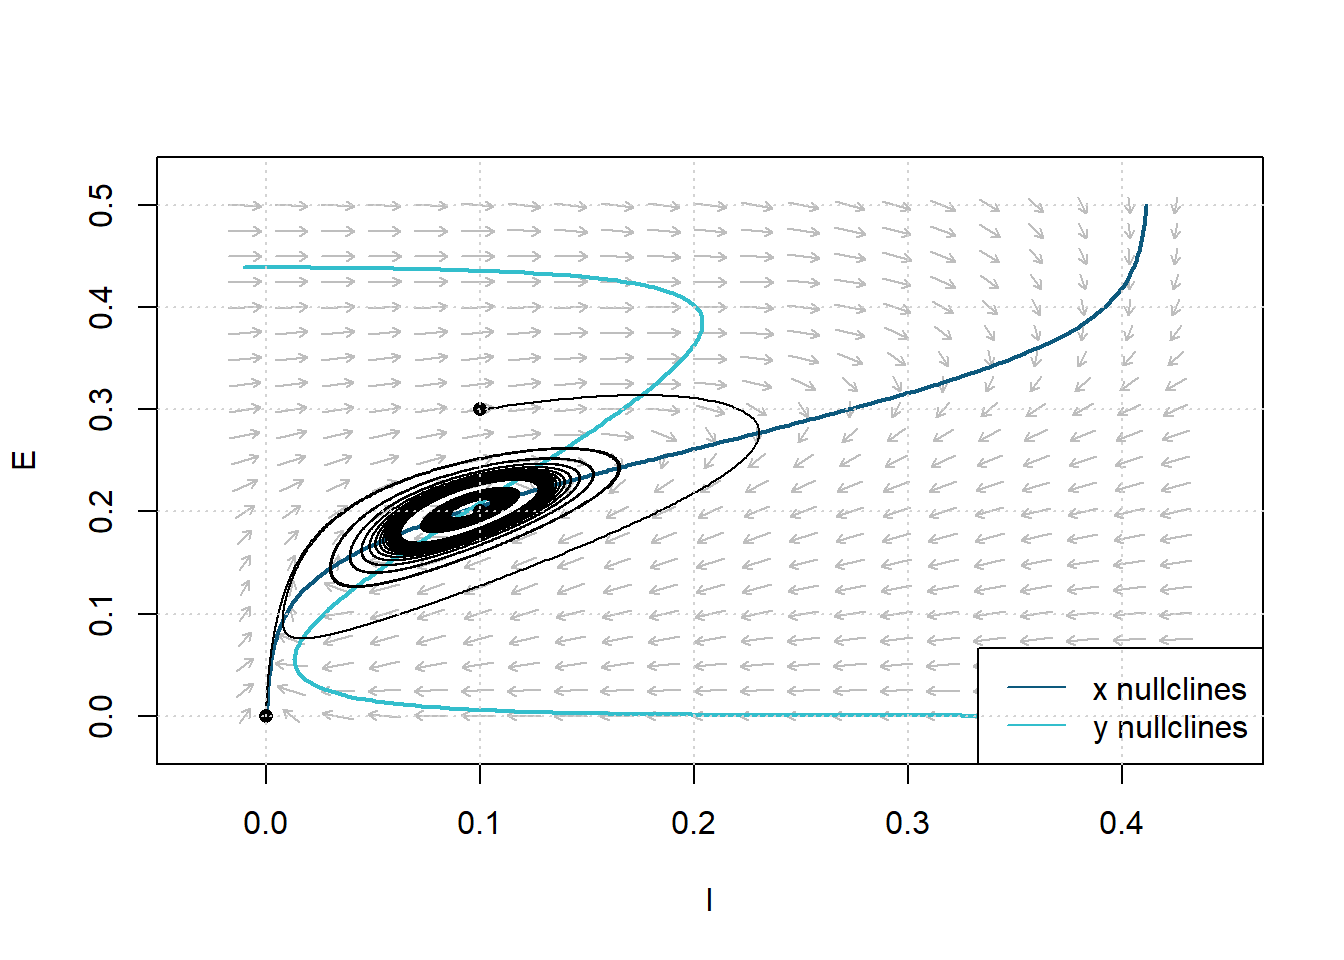 Figure  11: Phase Plane Analysis showing limit cycle trajectory in response to constant simulation $P=1.25$. Dashed lines are nullclines. Parameters: $c_1=16$, $c_2 = 12$, $c_3=15$, $c_4=3$, $a_e = 1.3$, $\theta_e=4$, $a_i=2$, $\theta_i = 3.7$, $r_e=1$, $r_i=1$.